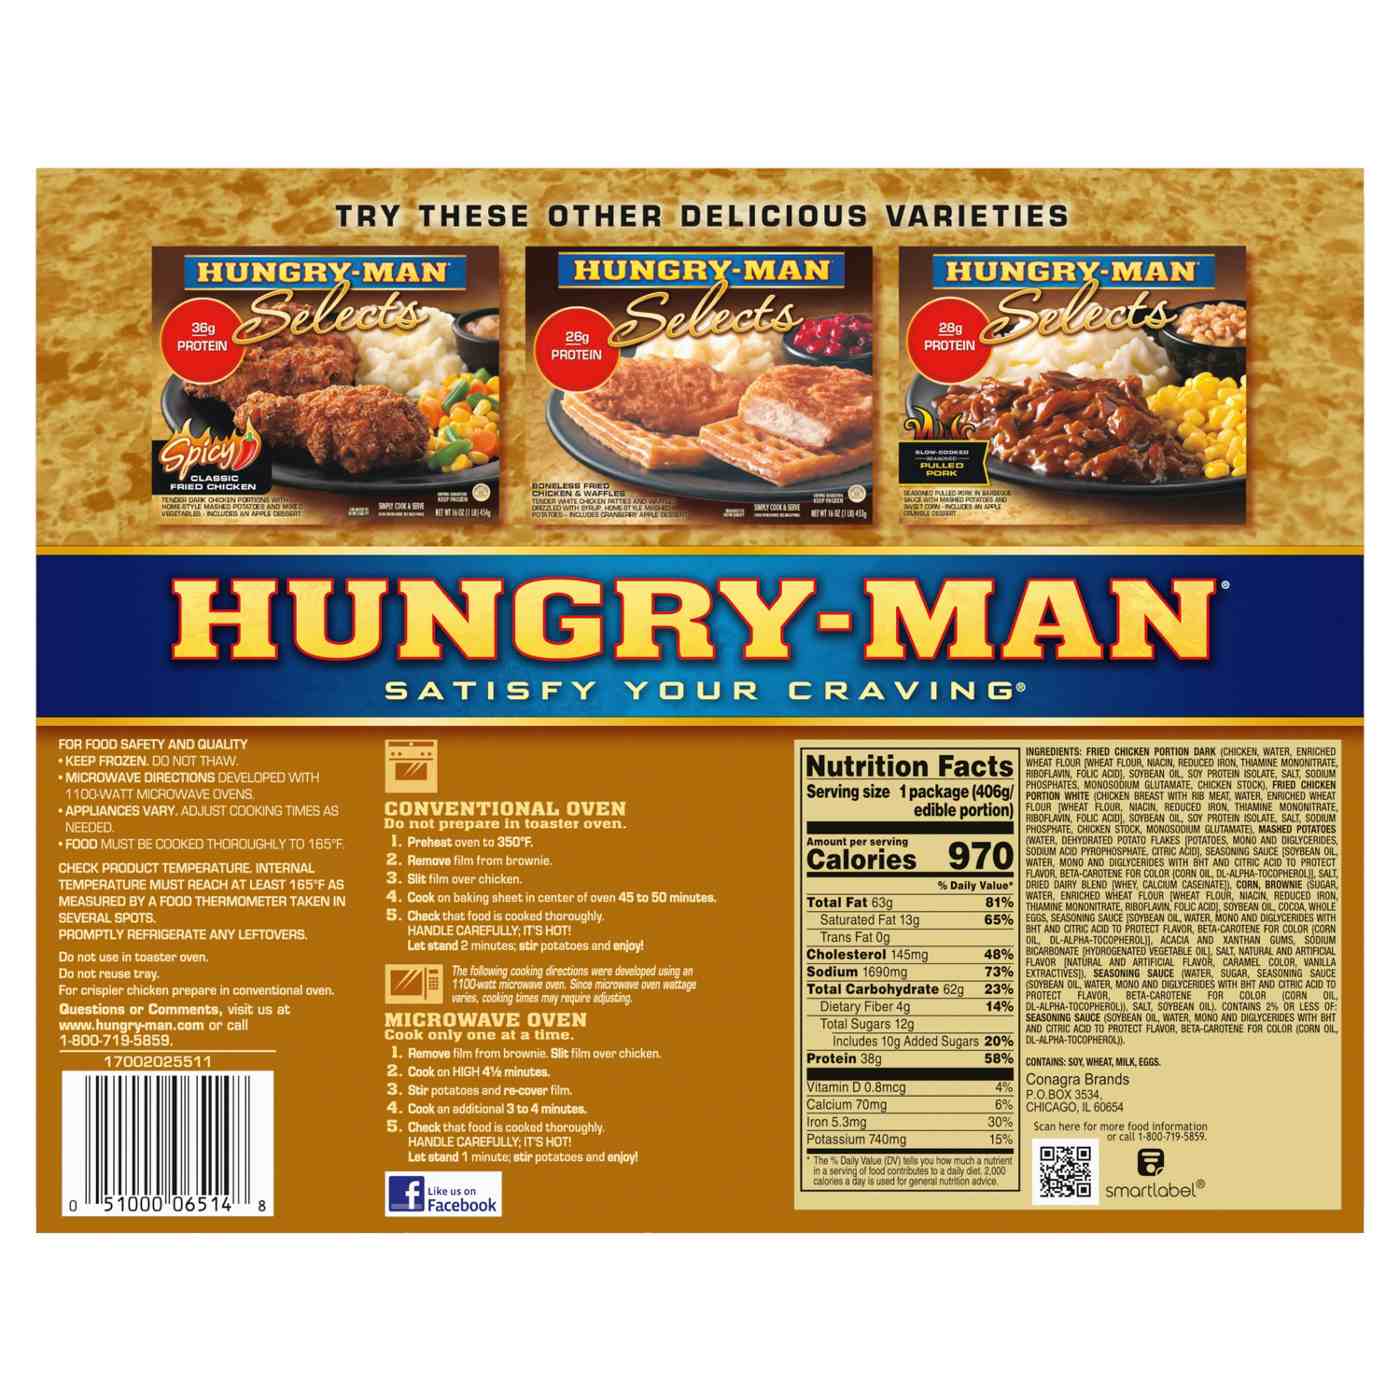 Hungry-Man Selects Classic Fried Chicken Frozen Meal; image 4 of 4